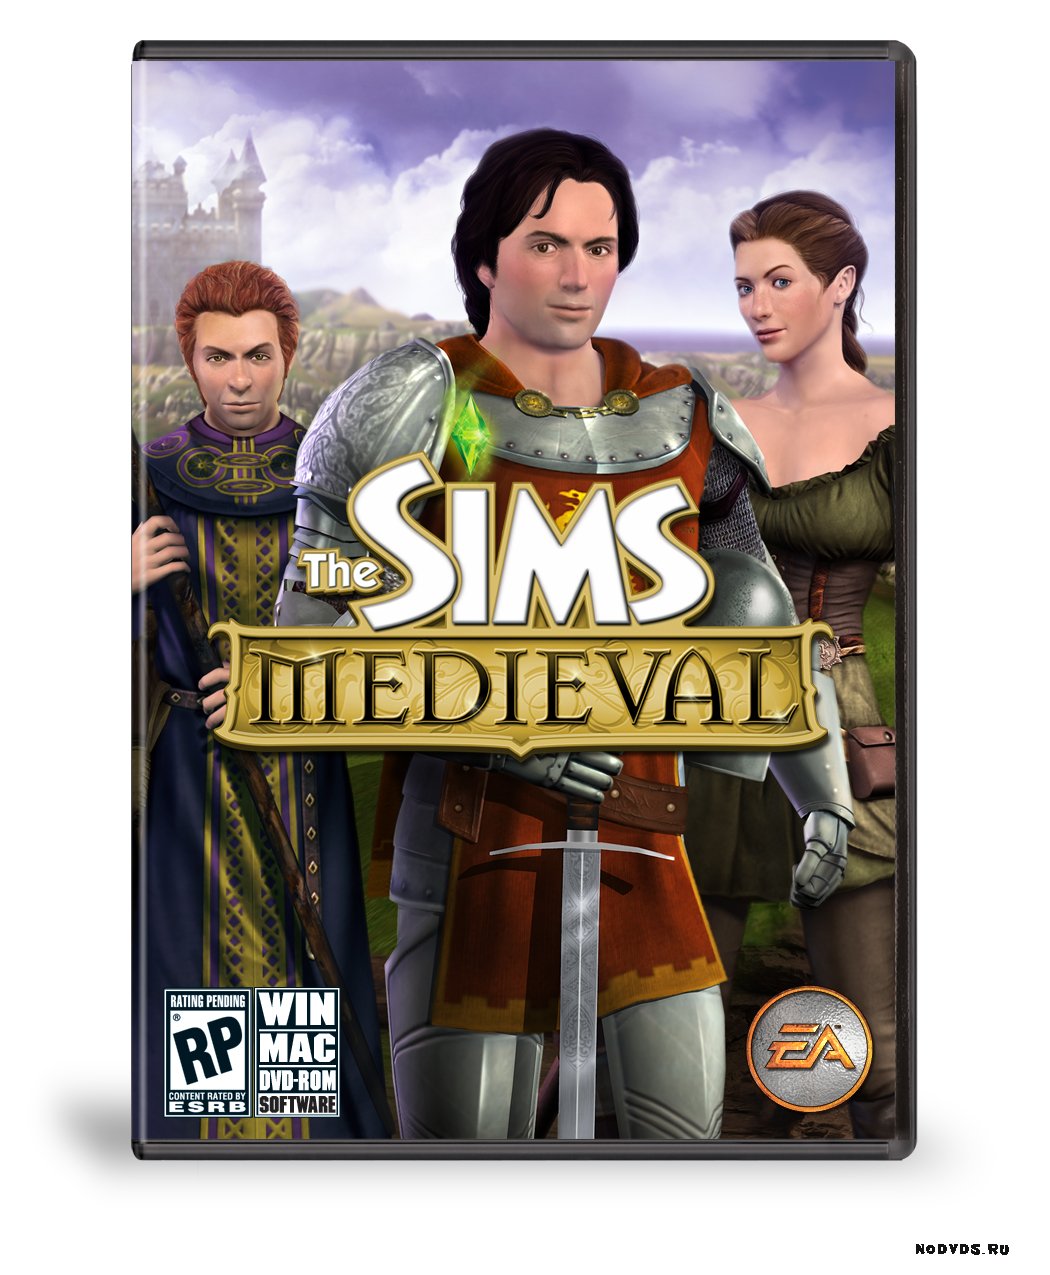  Sims Medieval, The -  ,   ...